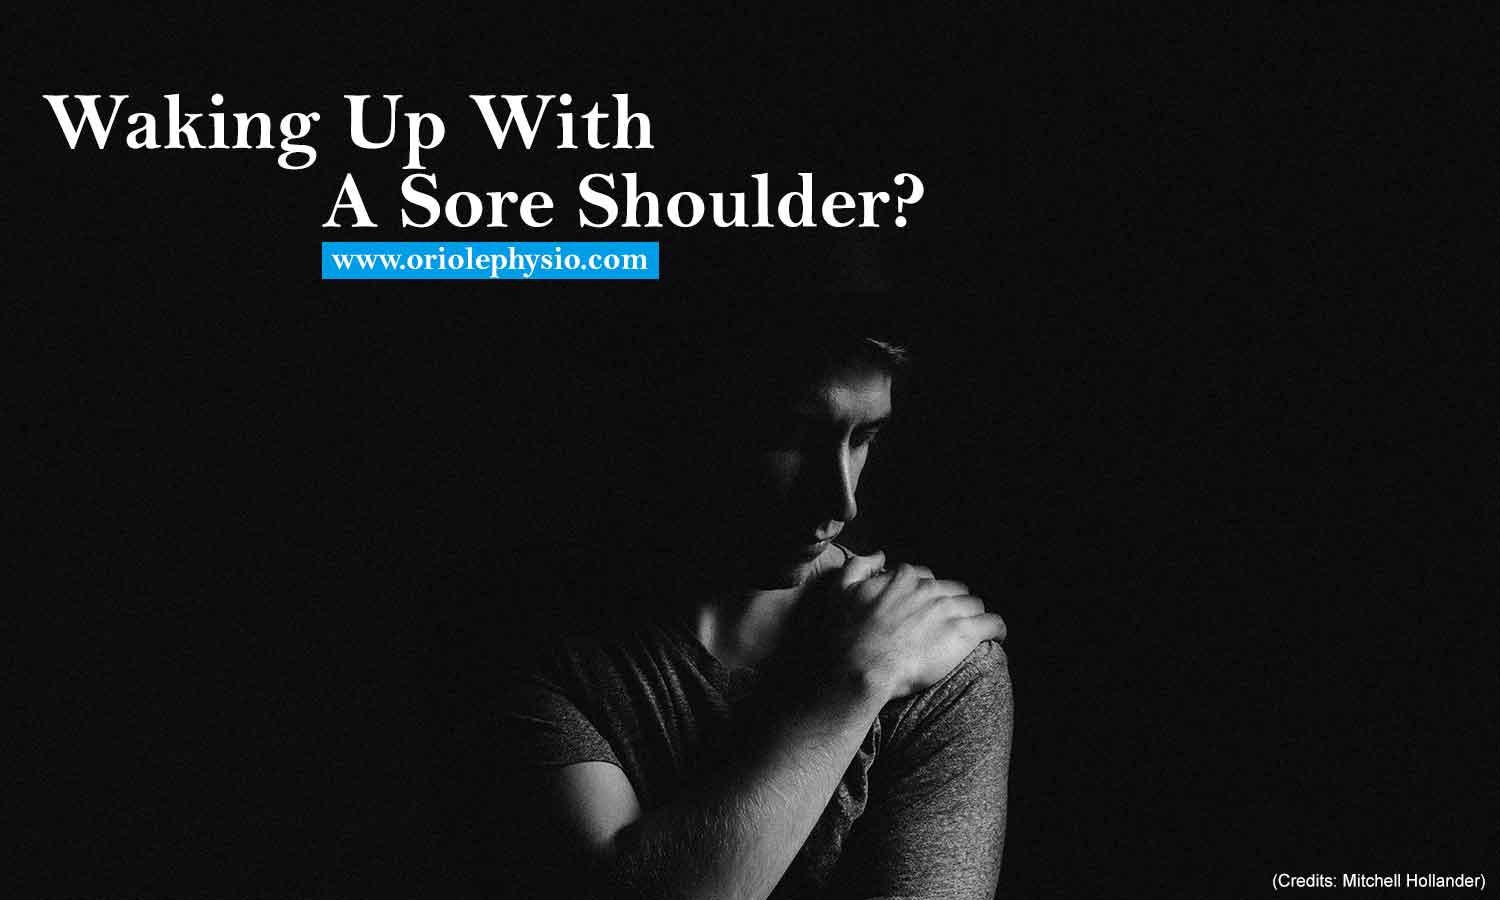 Waking Up With A Sore Shoulder?